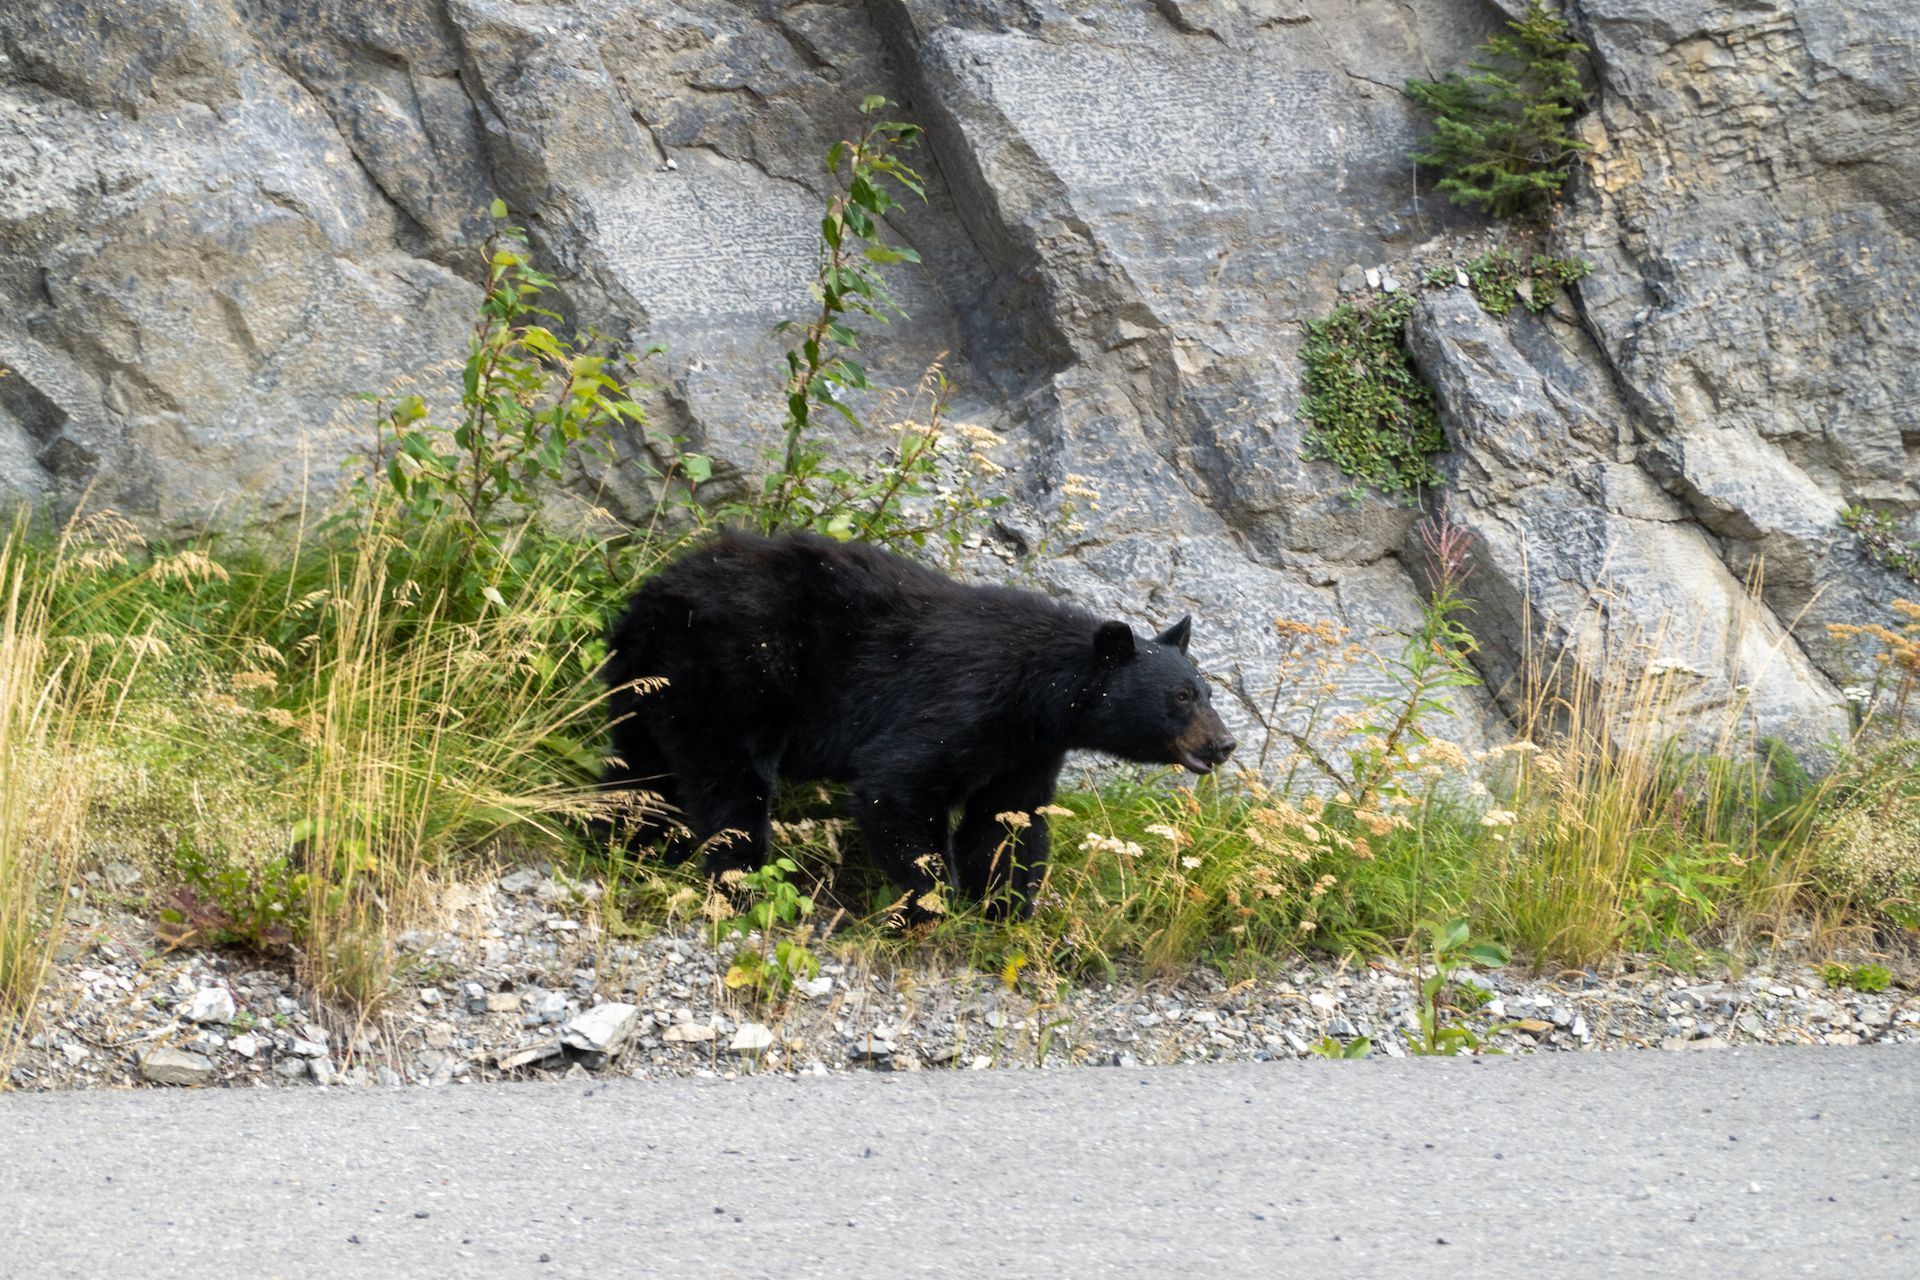 We saw a black bear harvesting berries on the side of the highway.🐻